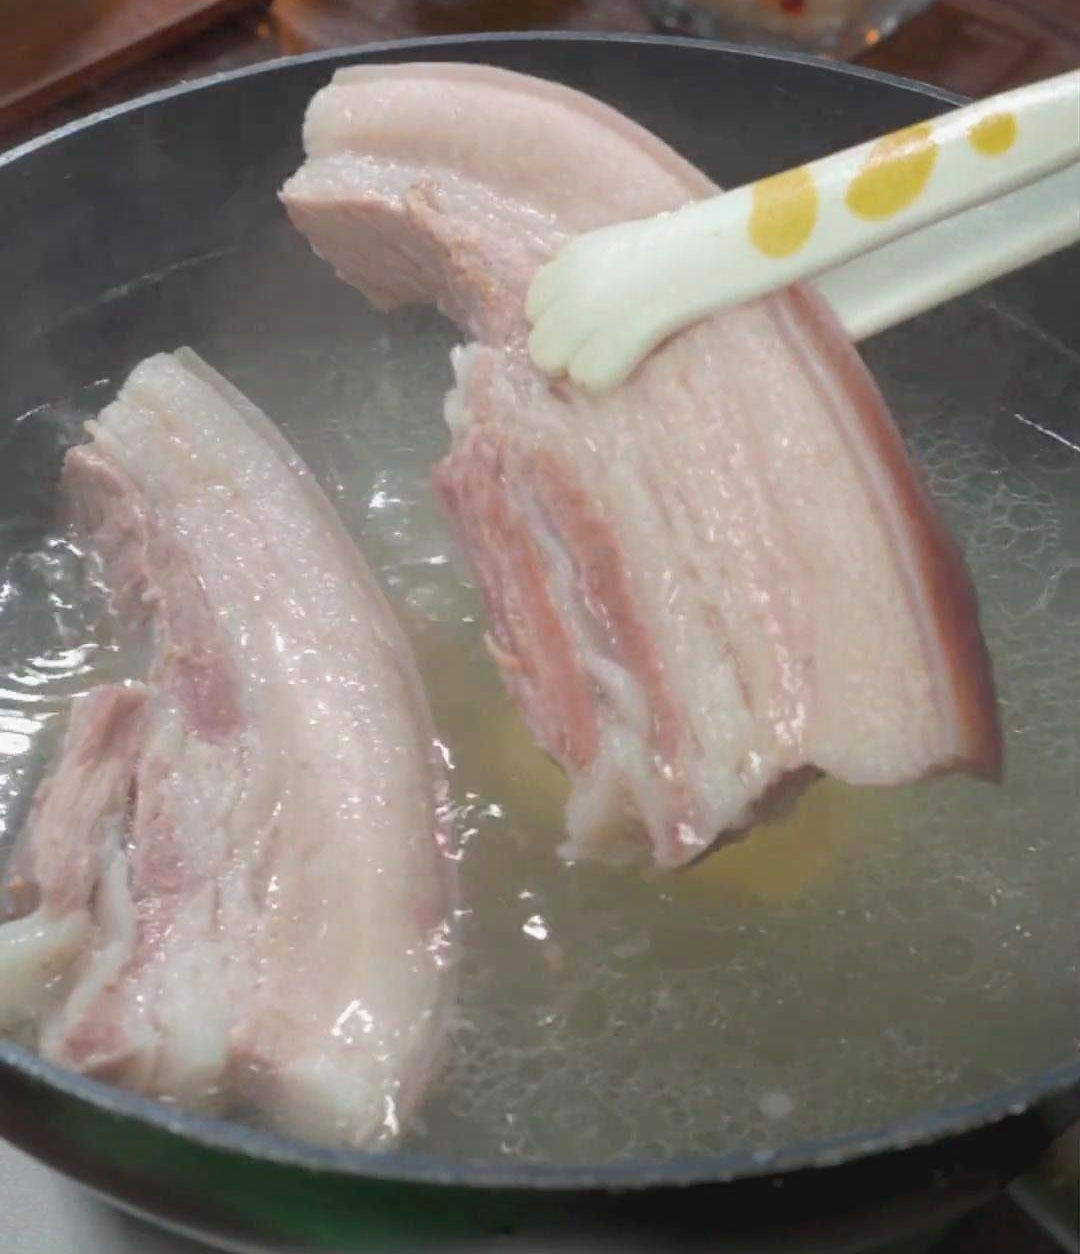 Boil the pork belly in the pot for 30 minutes